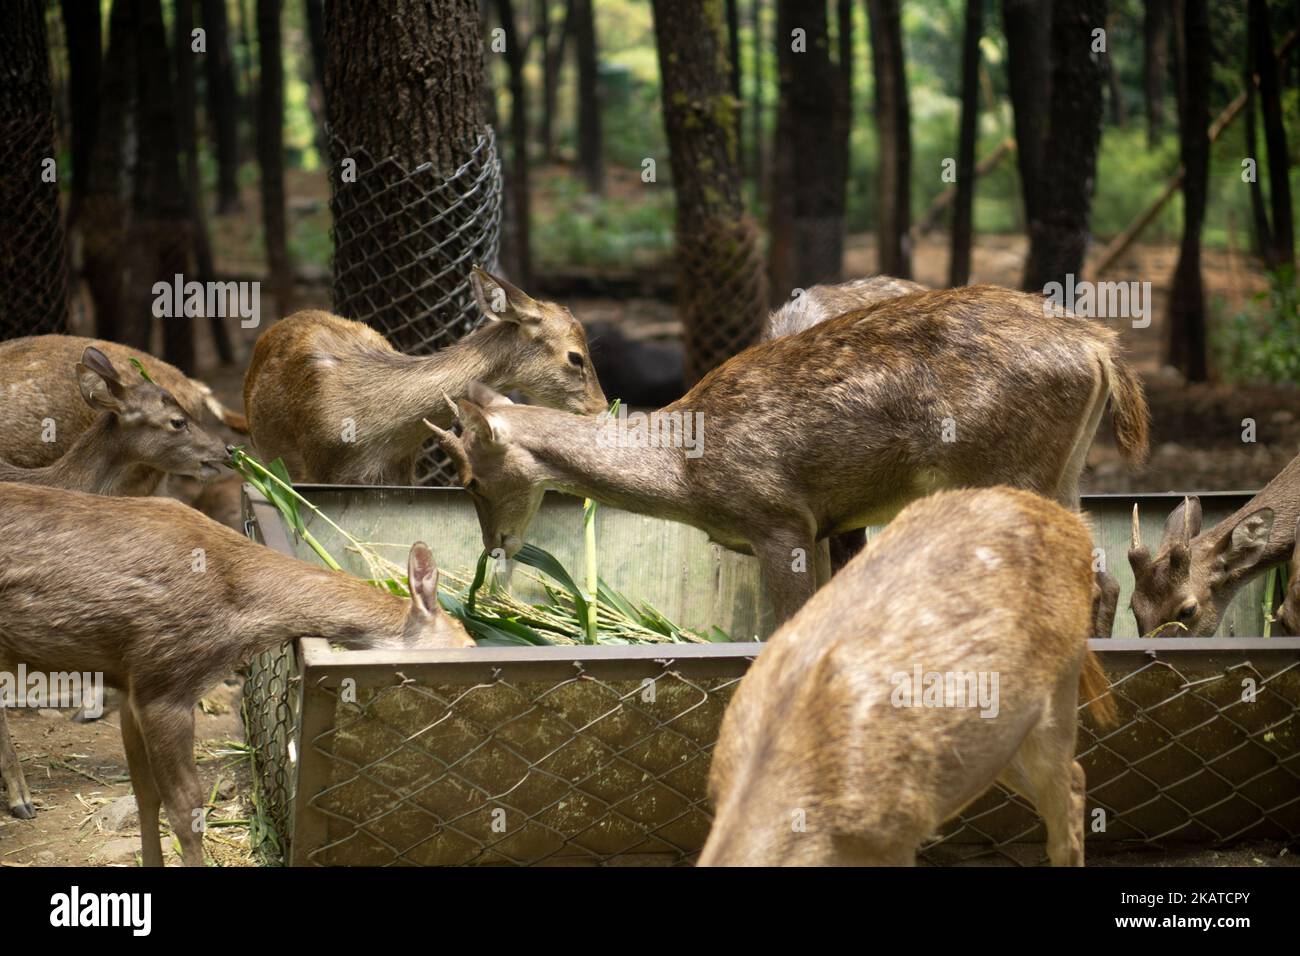 A group of young Bawean deer (Hyelaphus kuhlii) eating grass Stock Photo